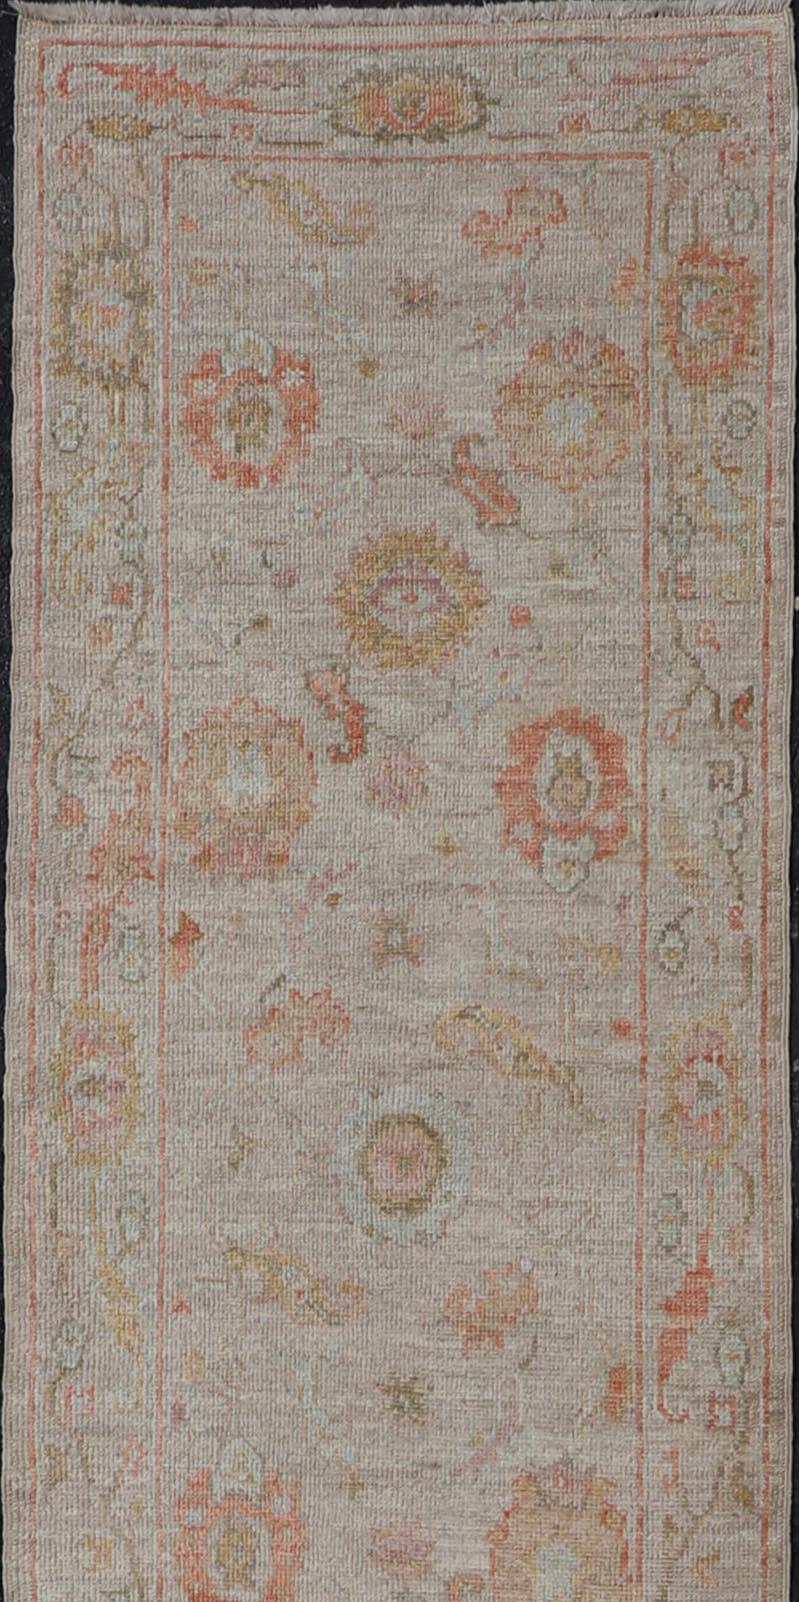 This angora Oushak is unique with is creamy background, to the floral like design rendered in coral, tangerine, forest green, salmon, and hints of sky blue. The border is harmonious in design and color, giving the piece a light and elegant yet